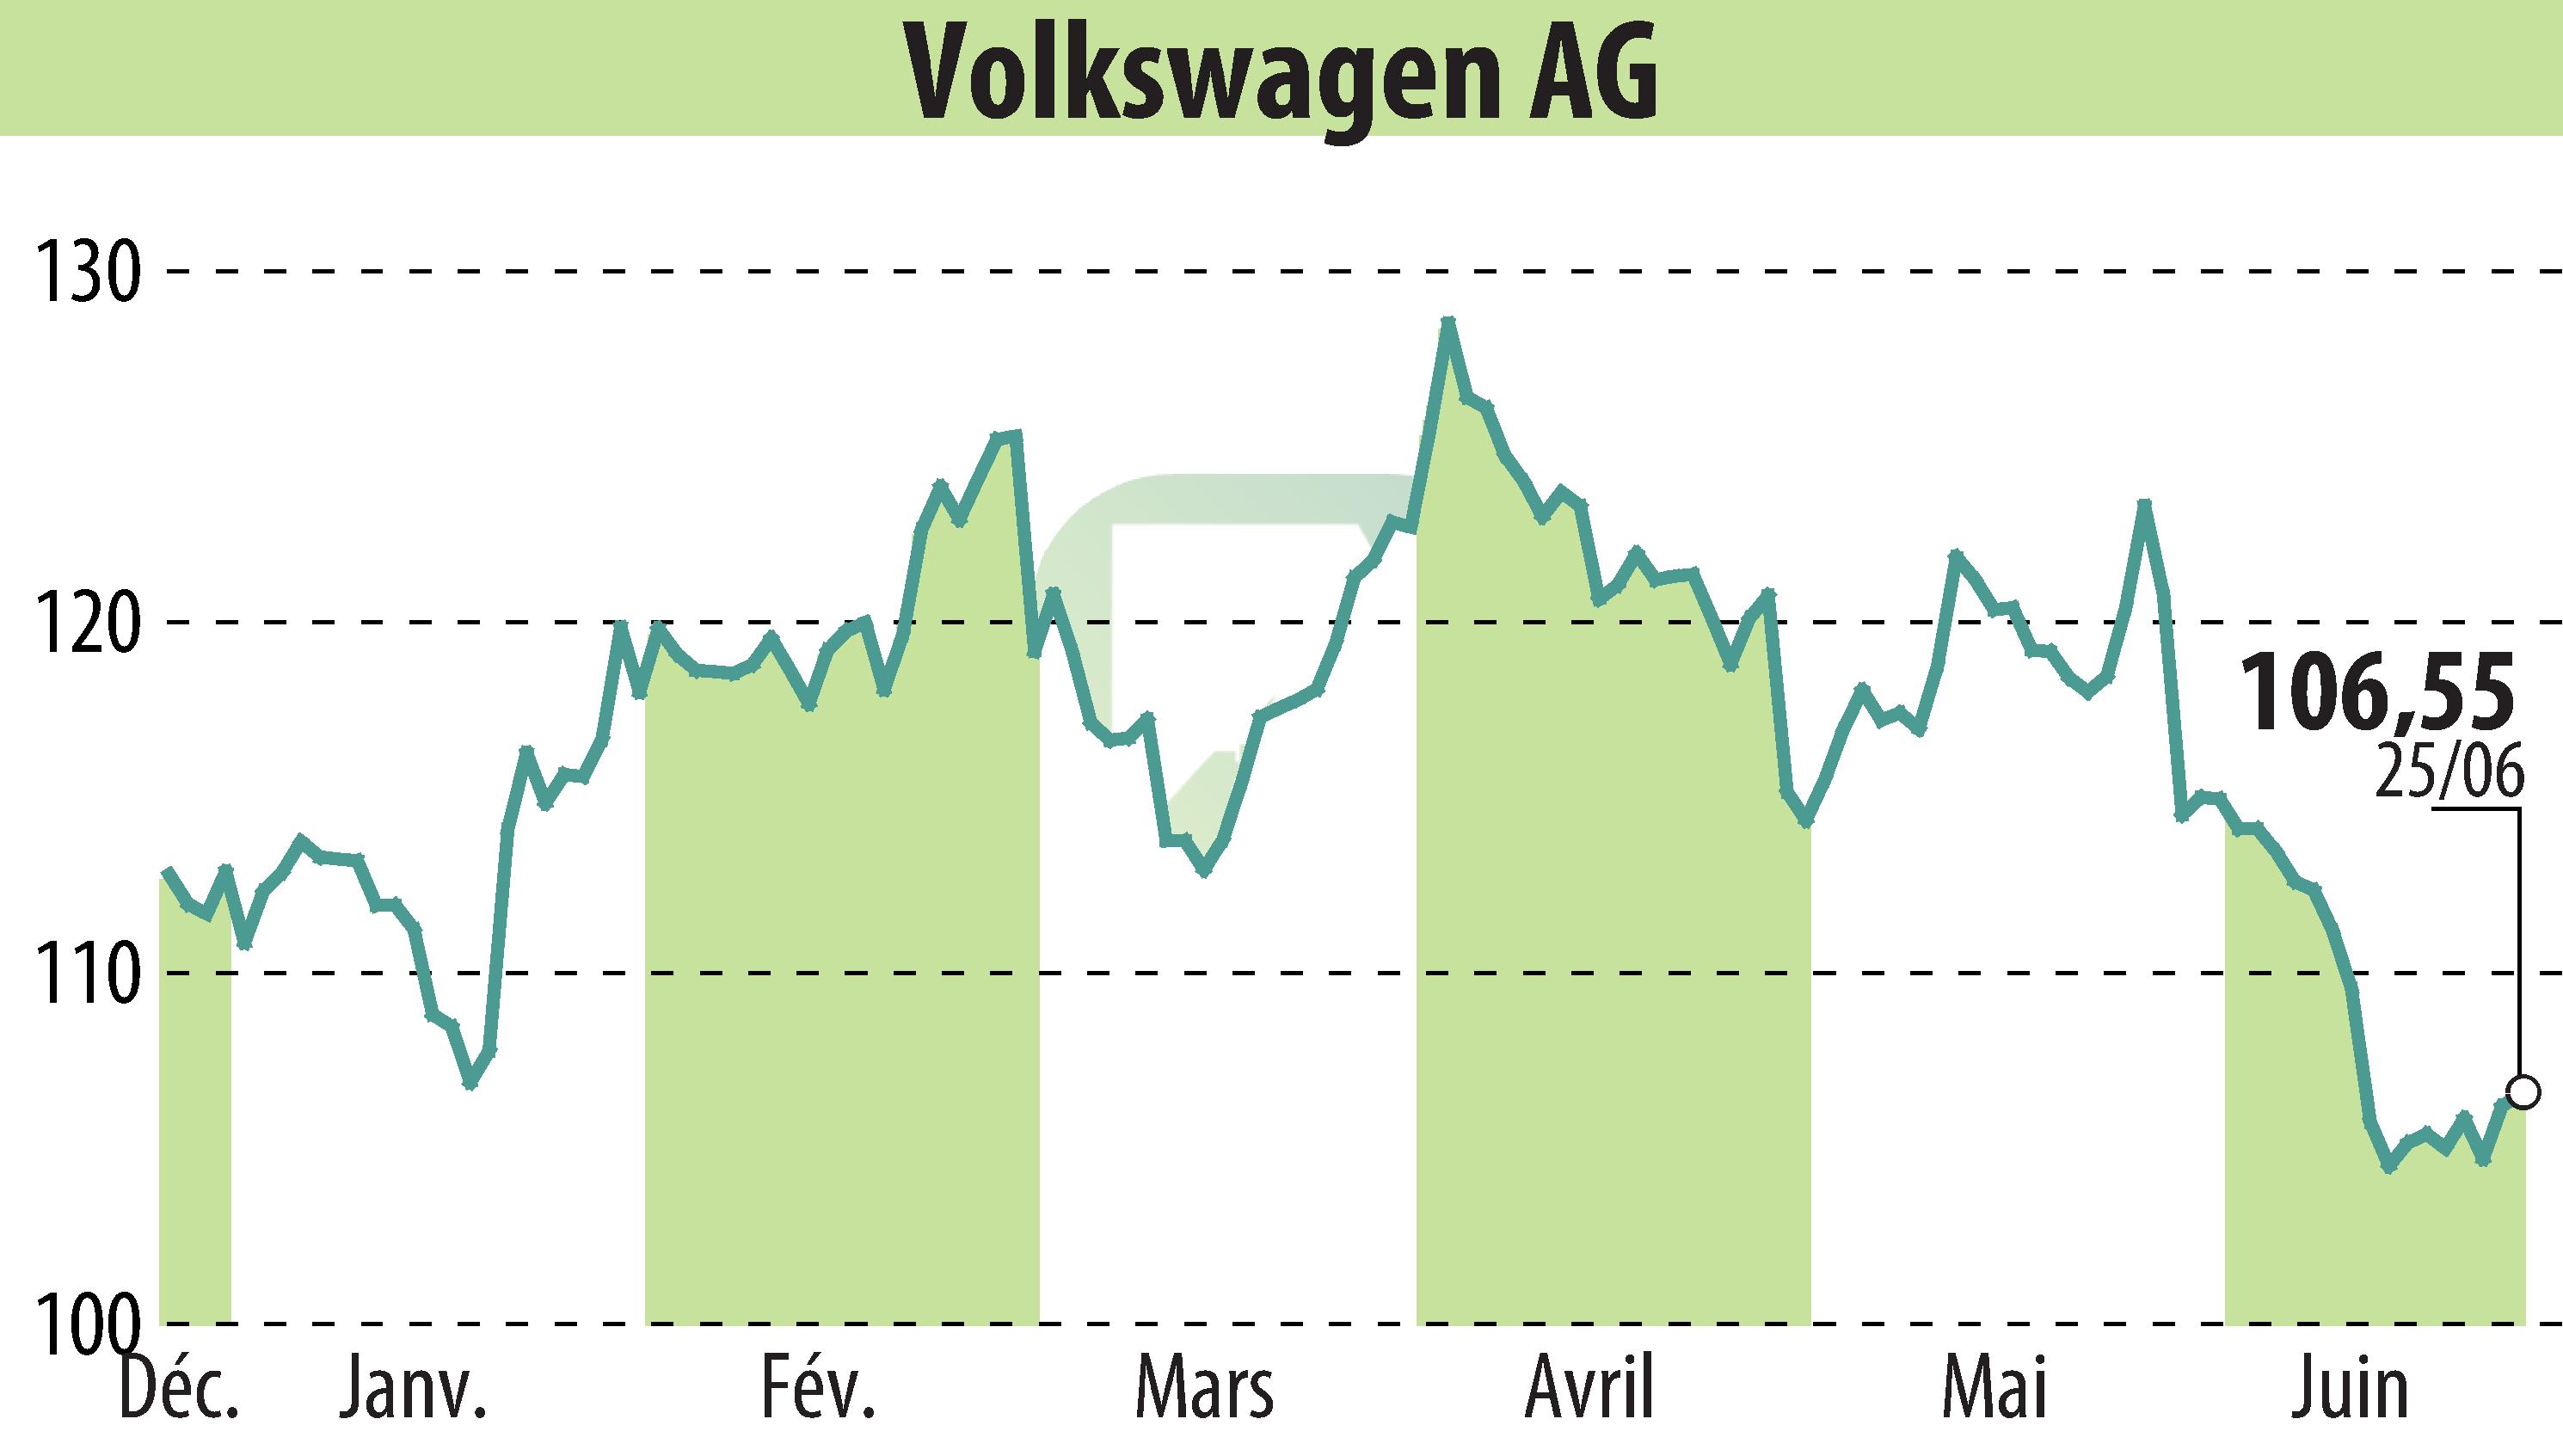 Stock price chart of VOLKSWAGEN AG (EBR:VOW3) showing fluctuations.